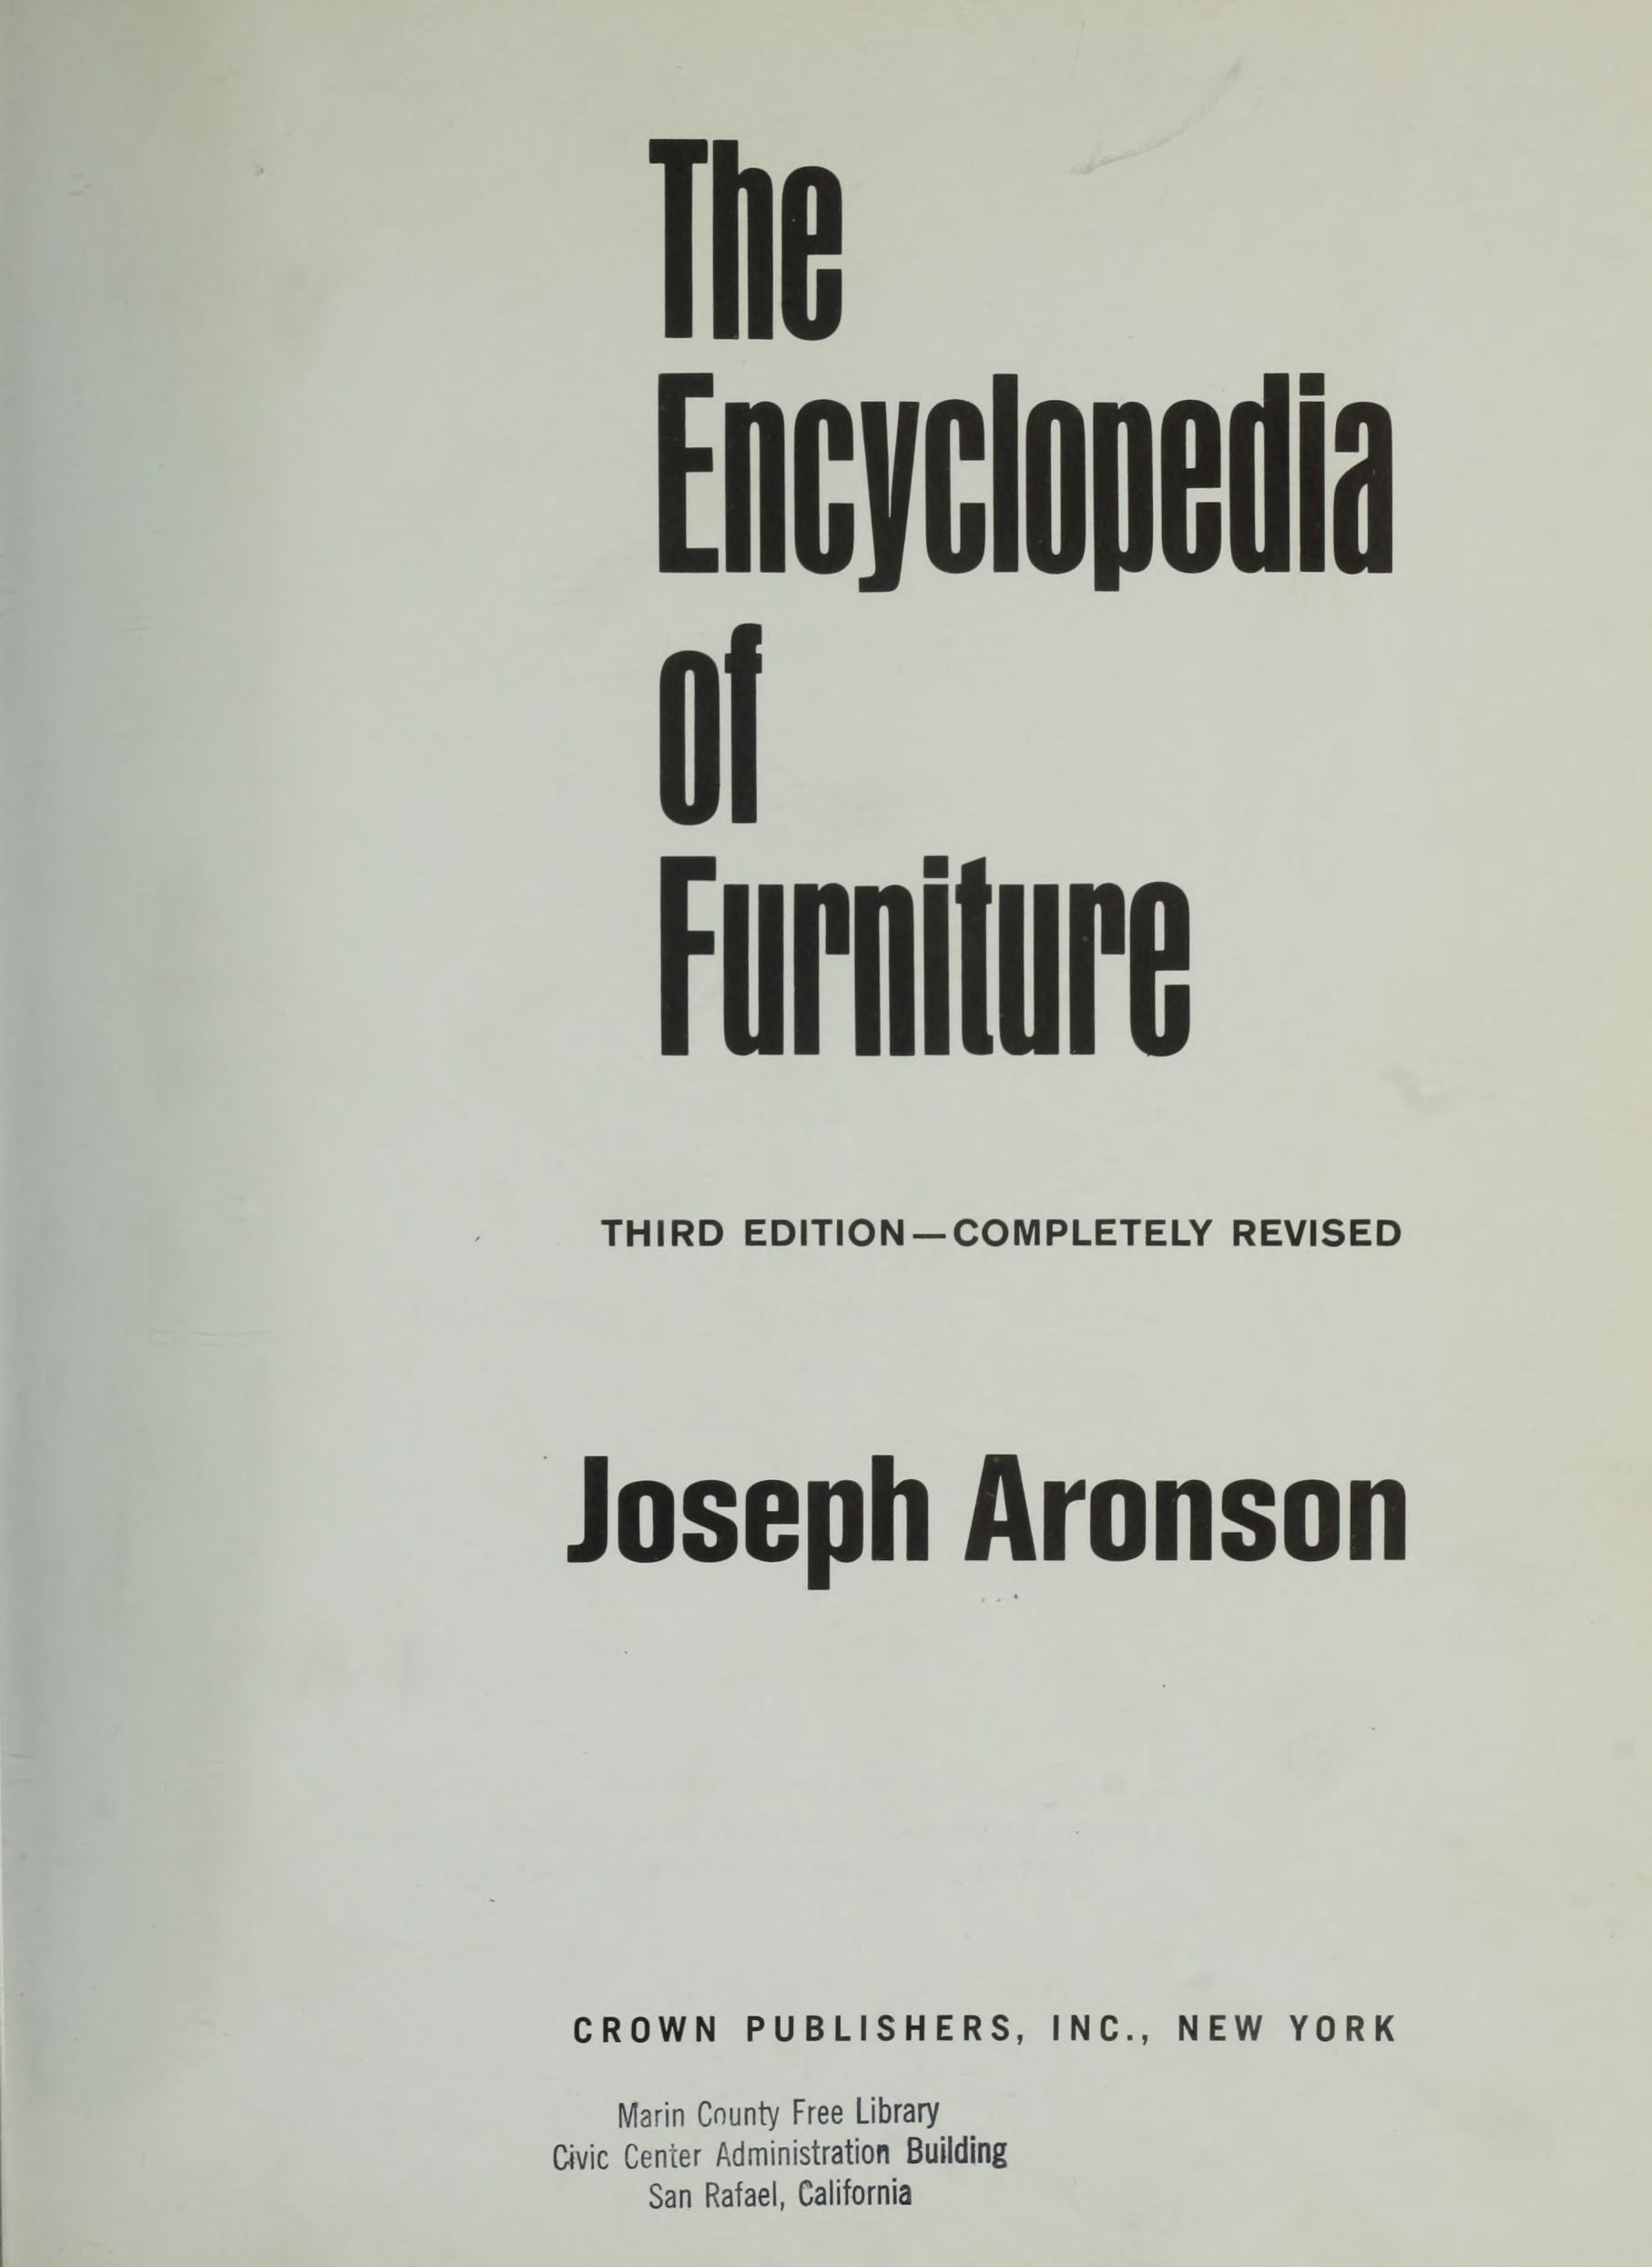 The Encyclopedia of Furniture / Joseph Aronson. — Third edition, completely revised. — New York : Crown Publishers, inc., 1965